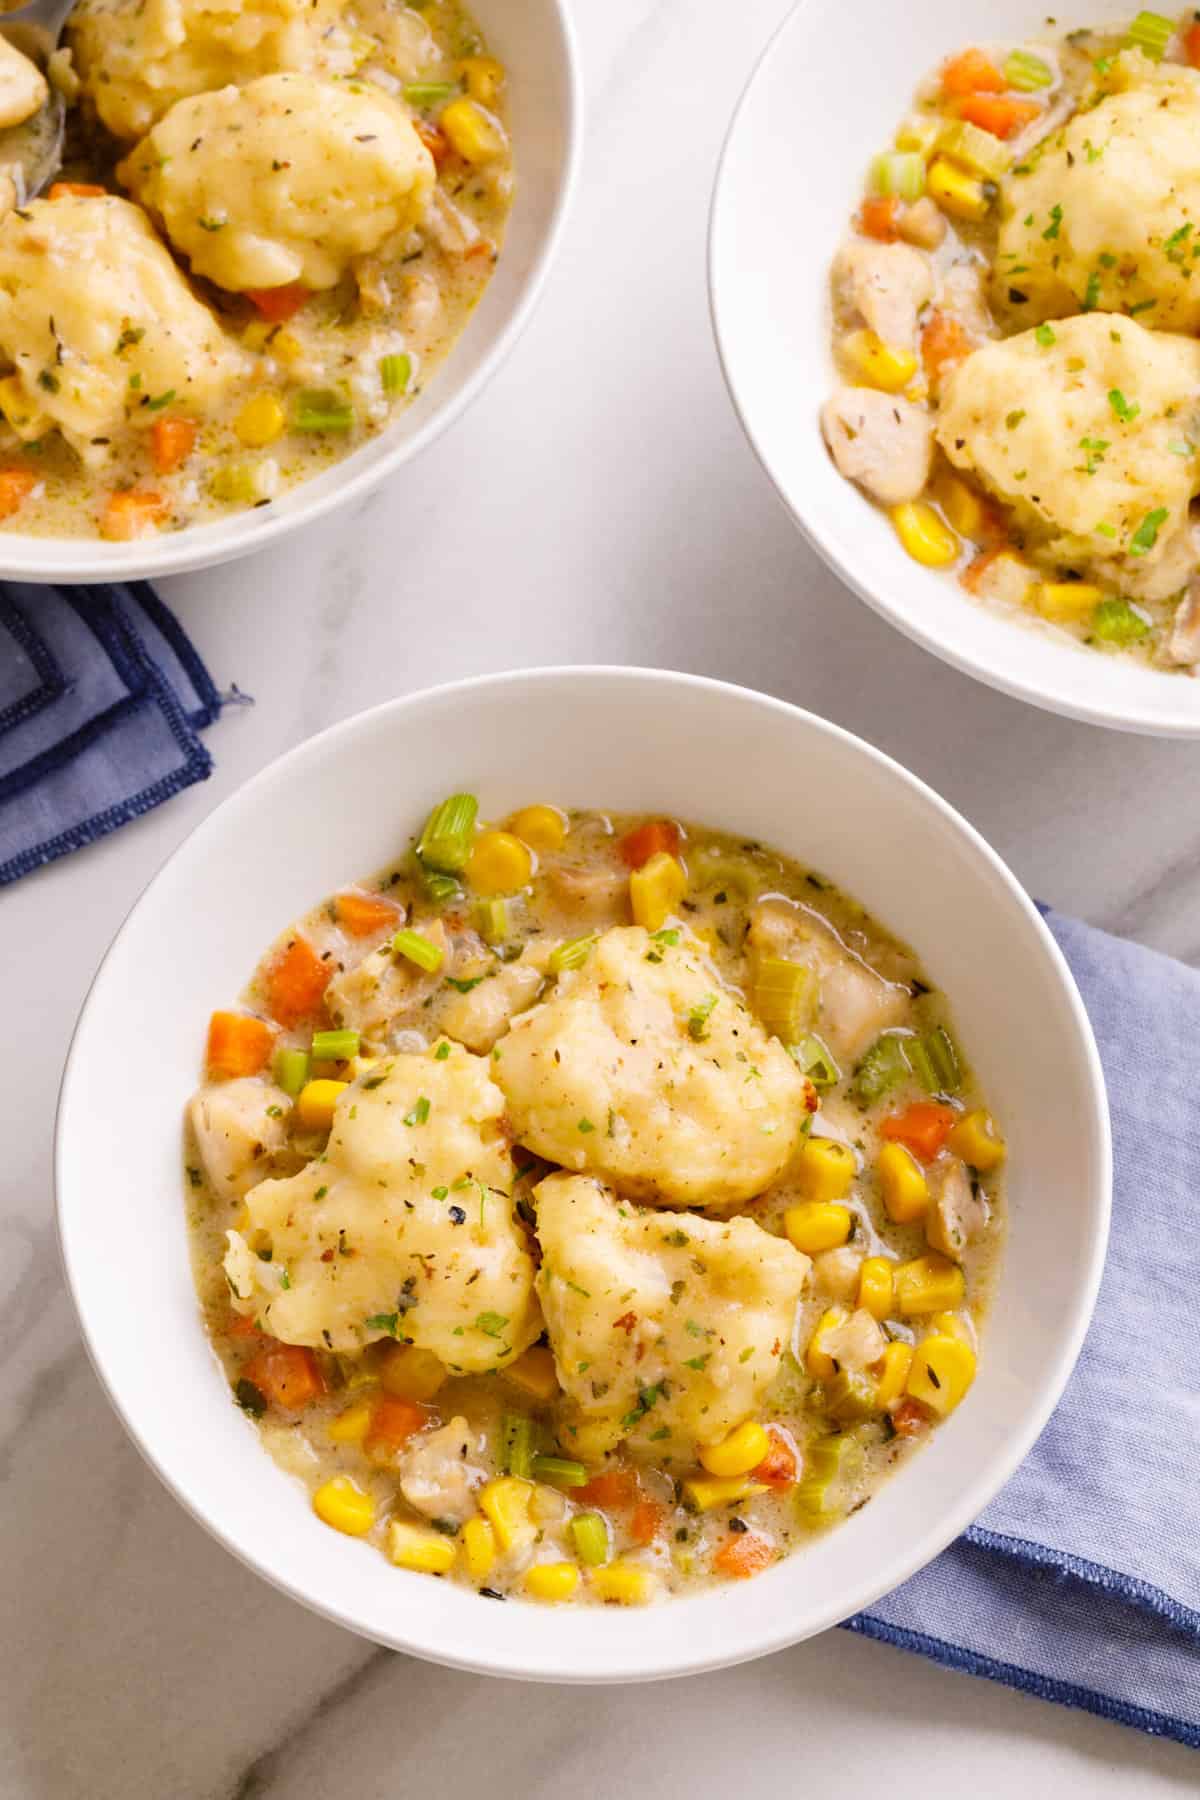 Top down image of a bowl of chicken and dumplings served in a white round bowl.